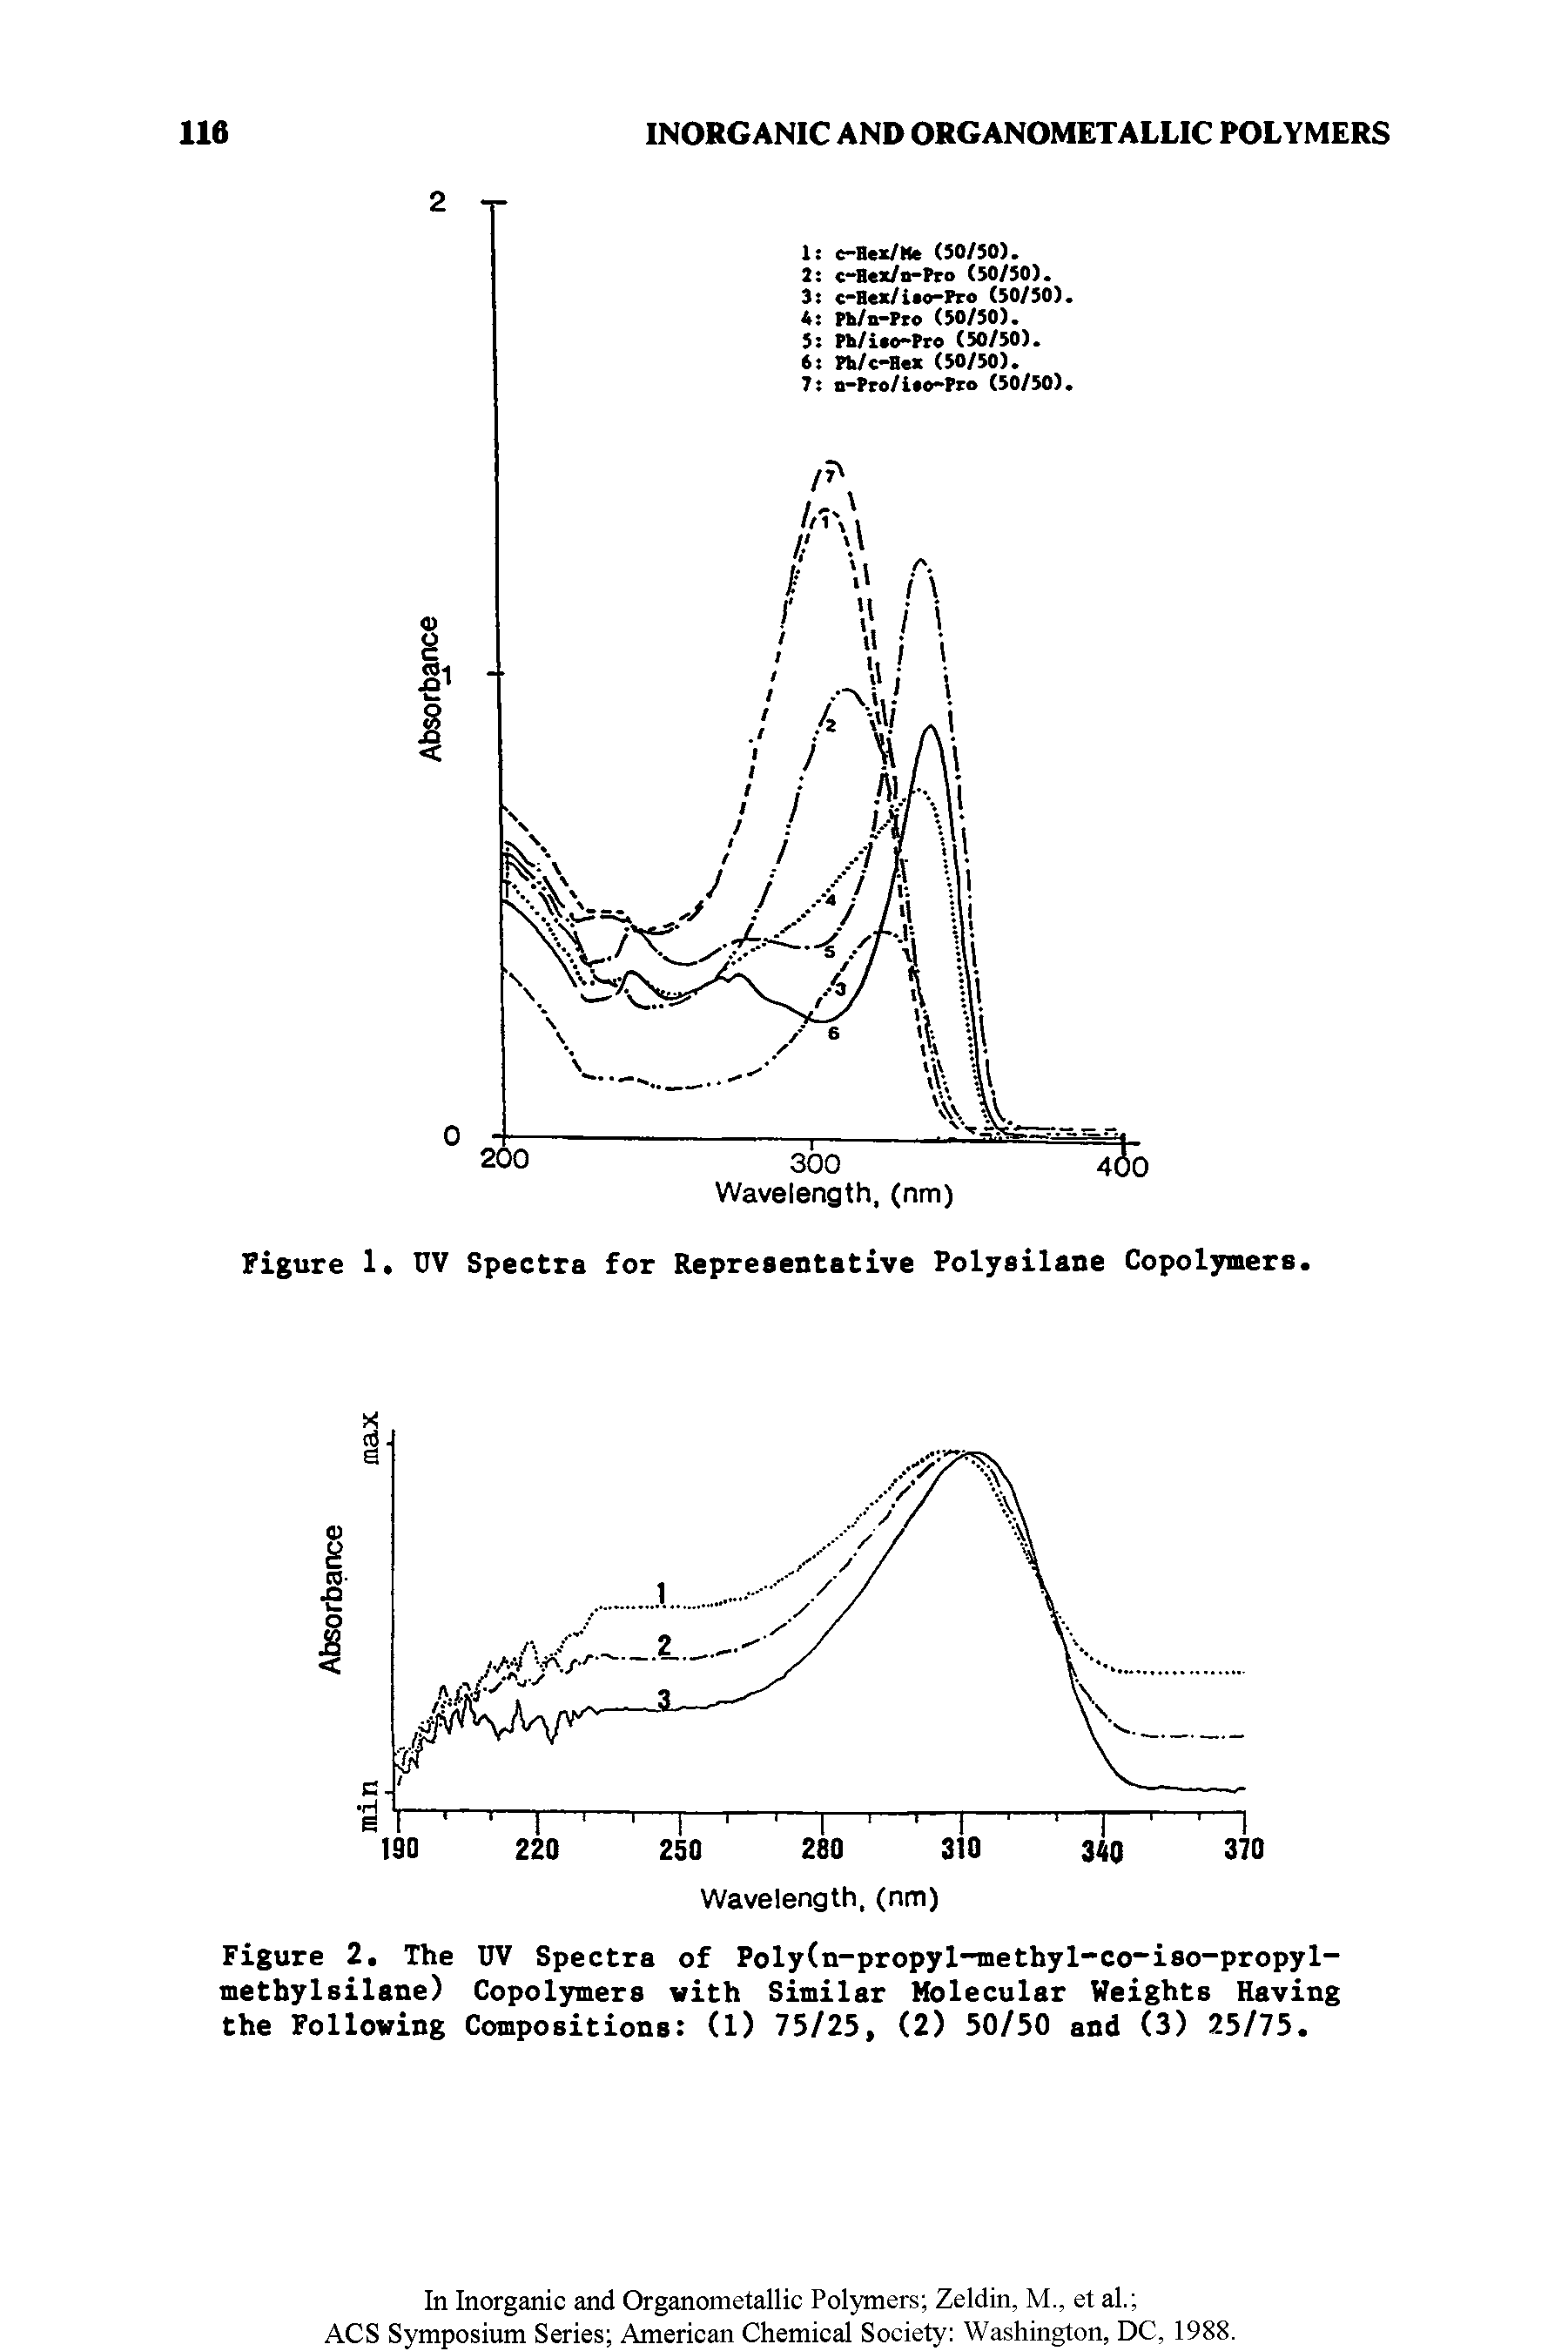 Figure 2. The UV Spectra of Poly(n-propyl-methyl-co iso-propyl-methylsilane) Copolymers vith Similar Molecular Weights Having the Following Compositions (1) 75/25, (2) 50/50 and (3) 25/75.